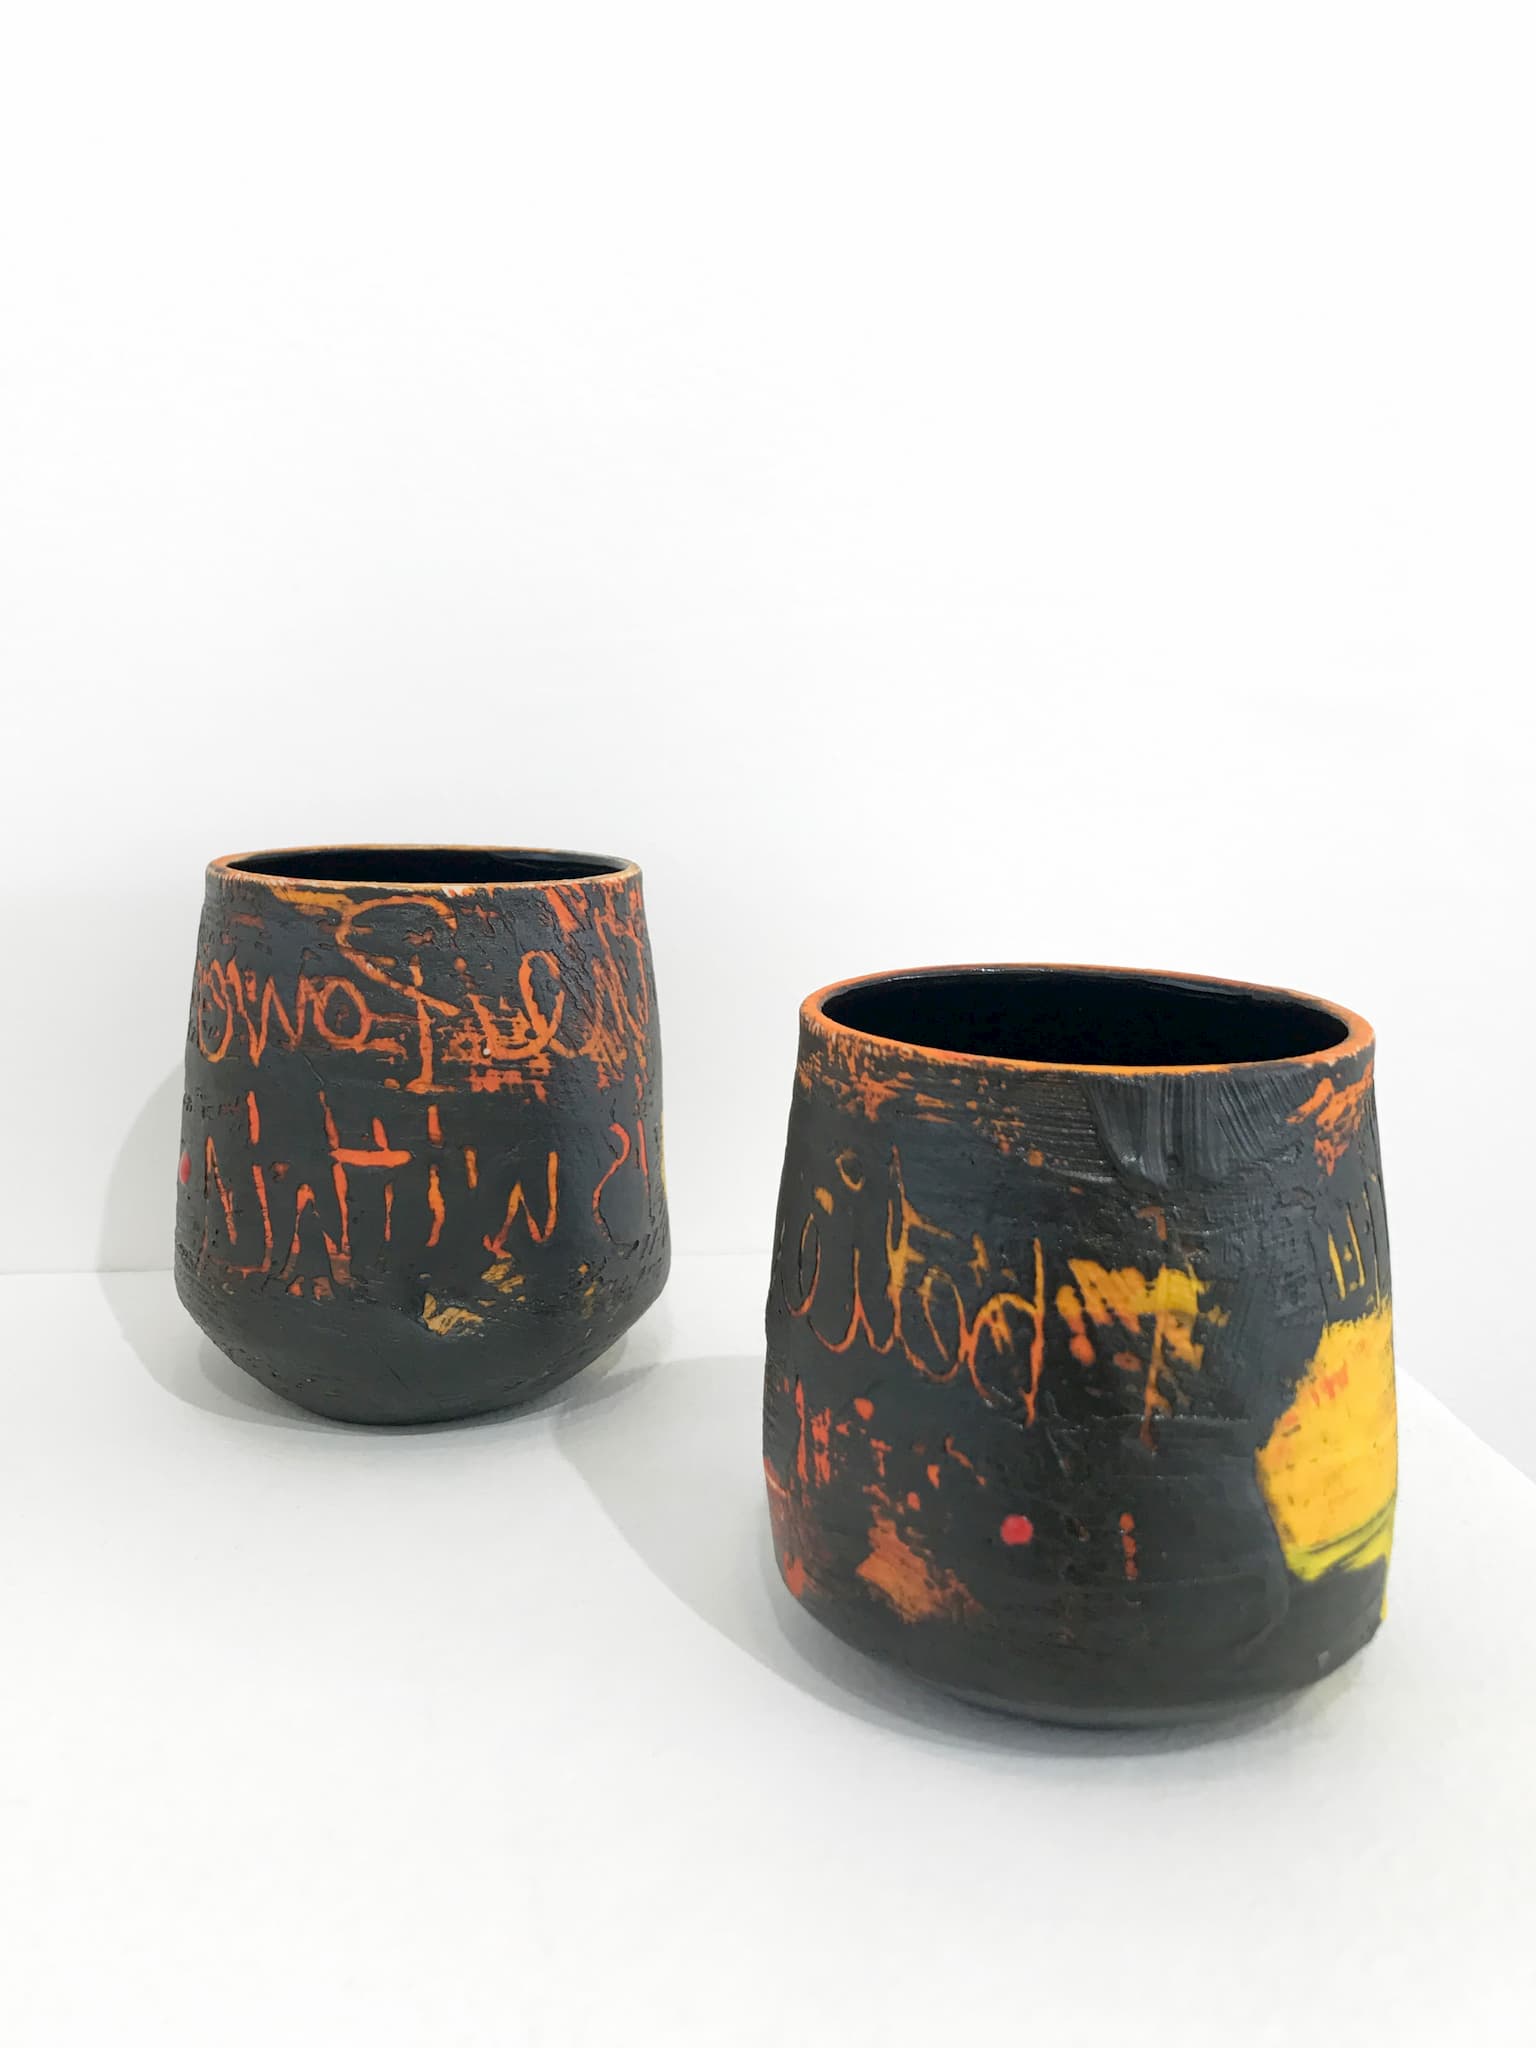 Craft in America Here/Now Yunomi Lesley McInally